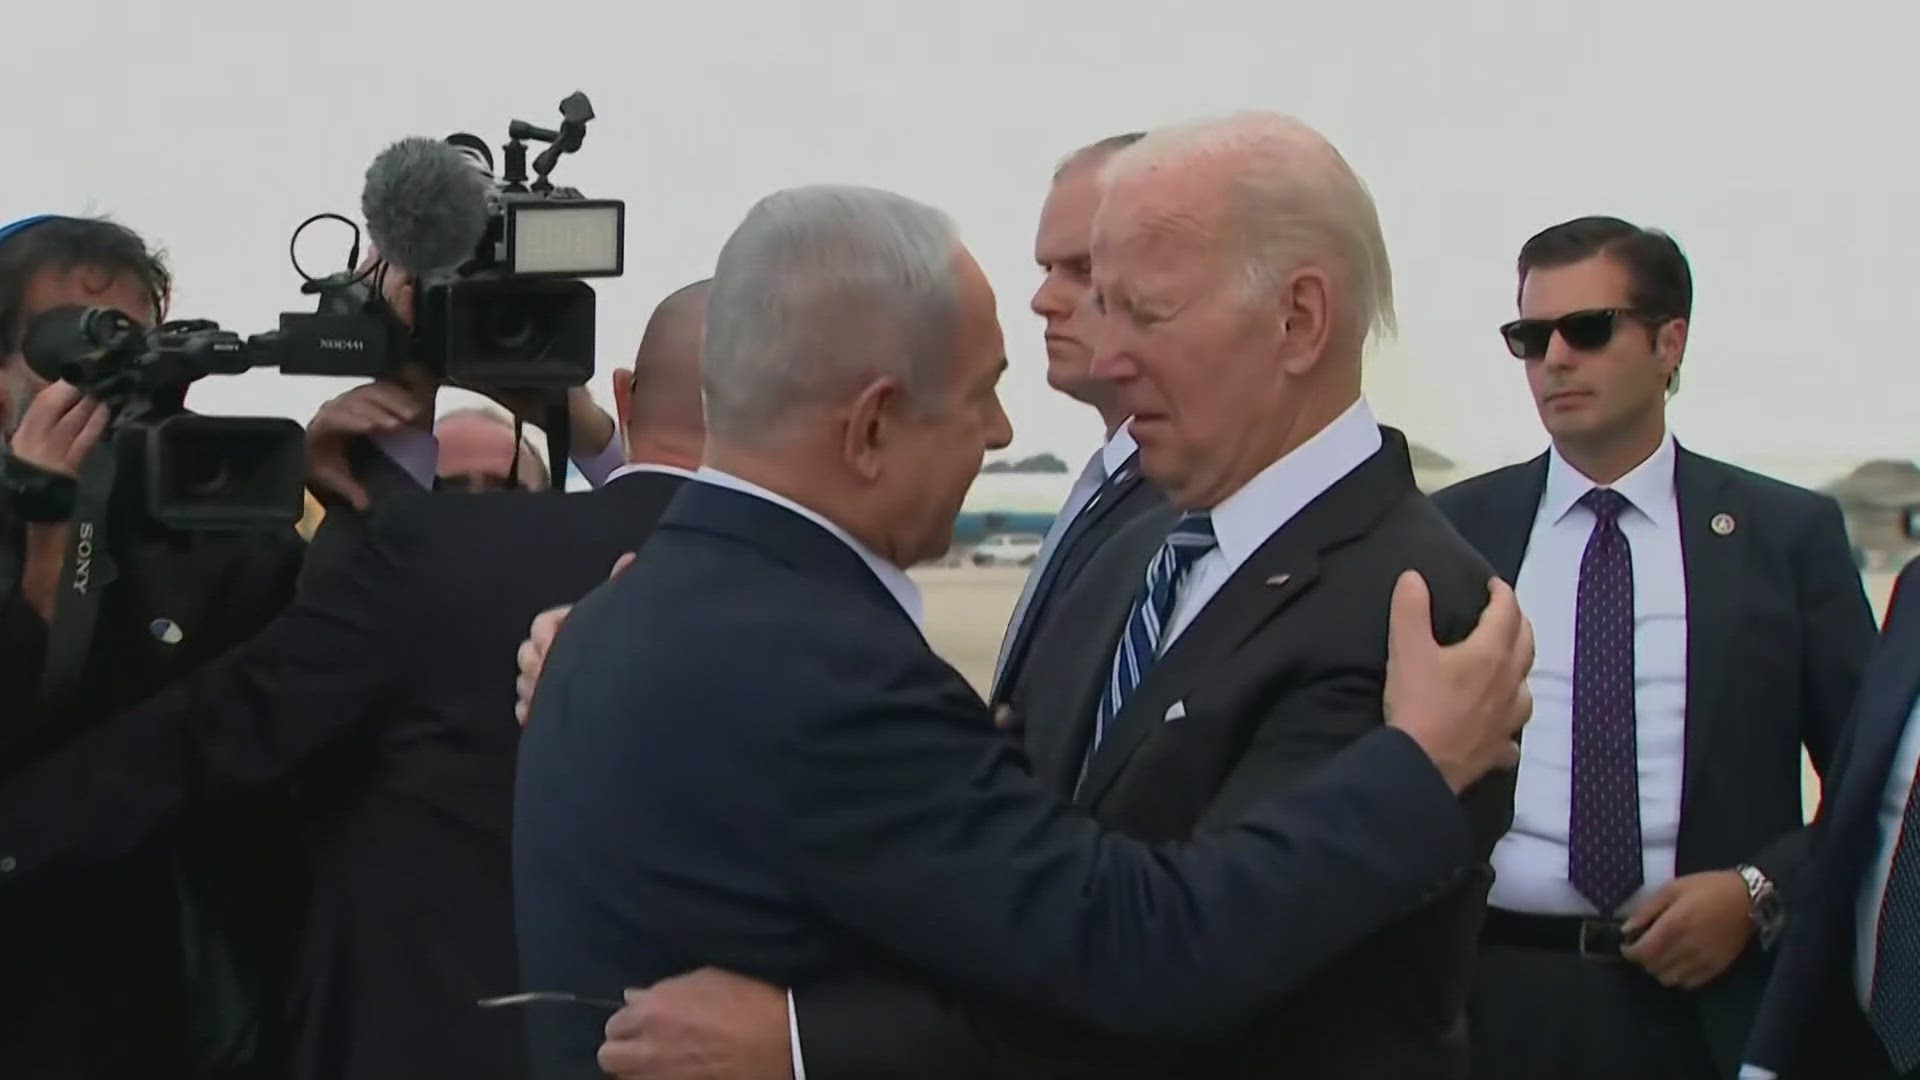 Biden will stress humanitarian aid, avoiding deeper conflict in Israel but is scrapping Jordan stop.